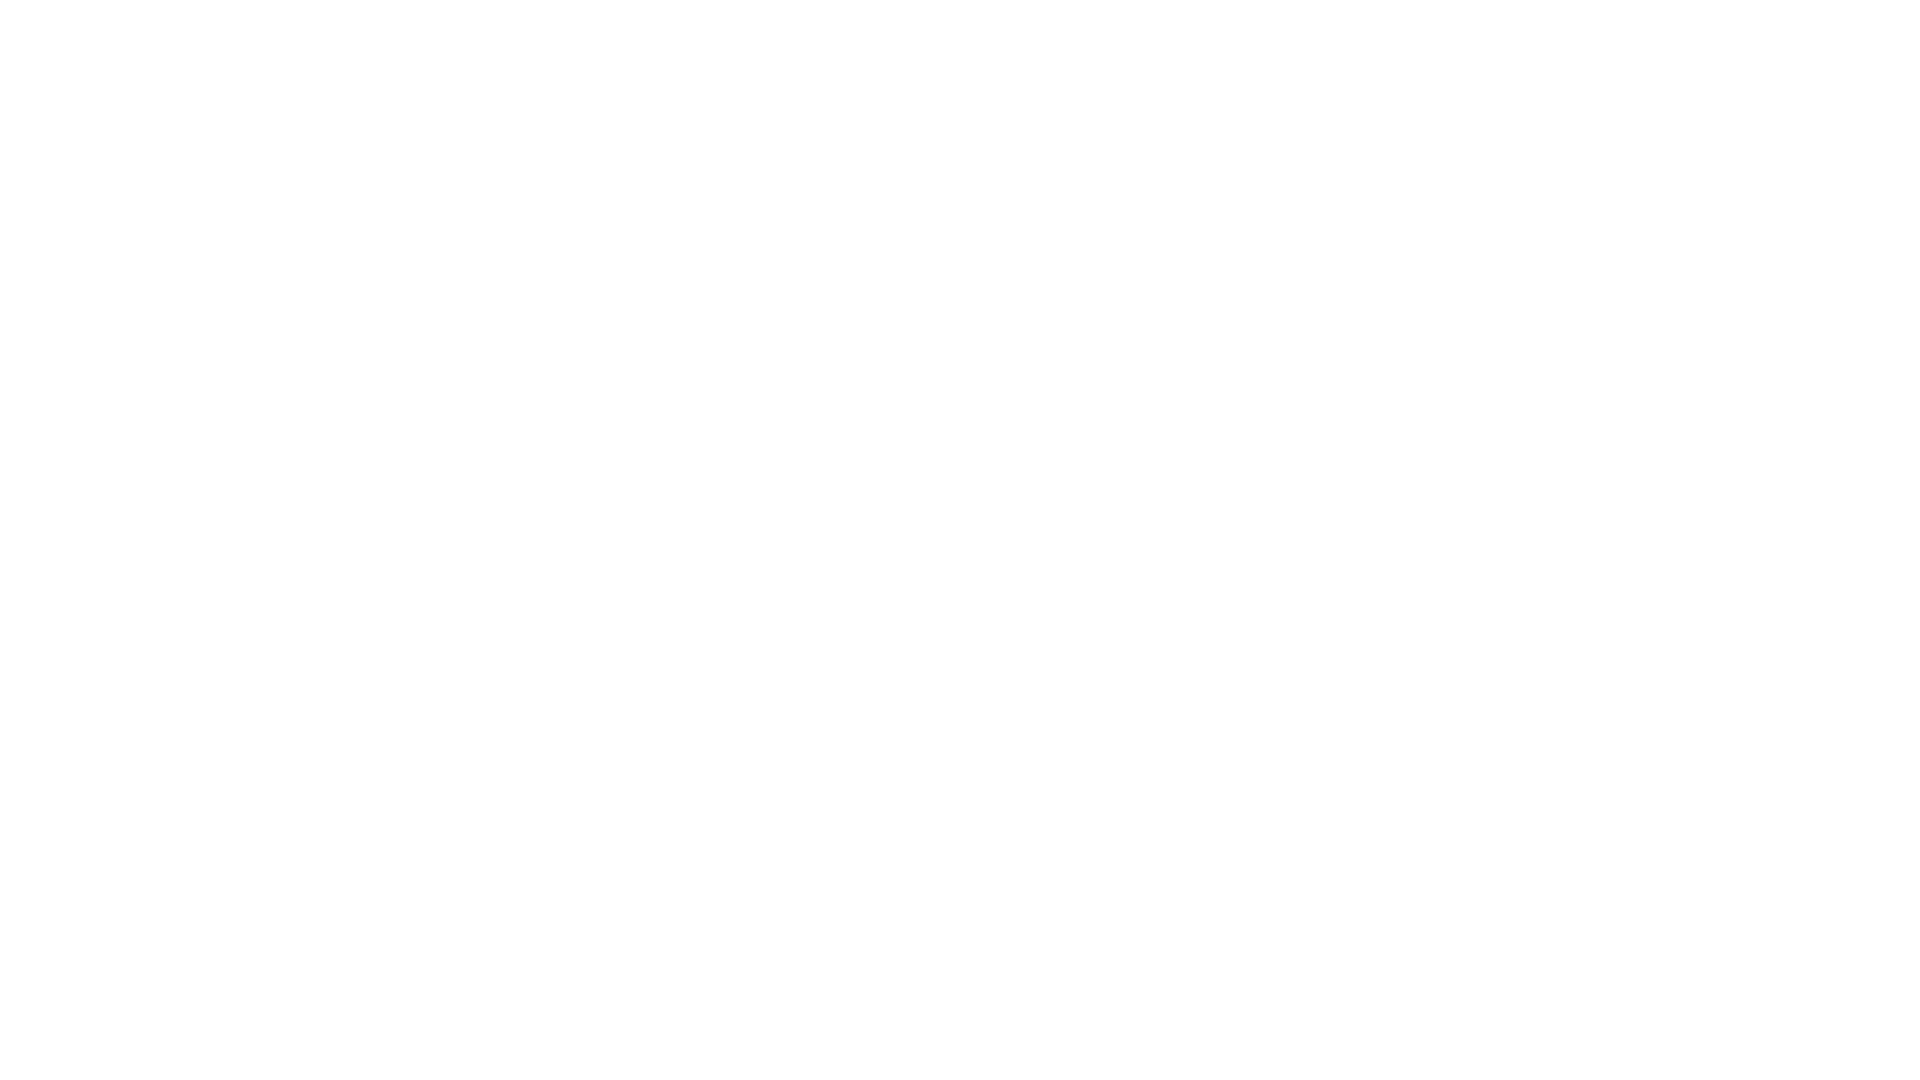 Be Human.  Make mistakes, celebrate, adapt, grow, connect... It's all part of being human.